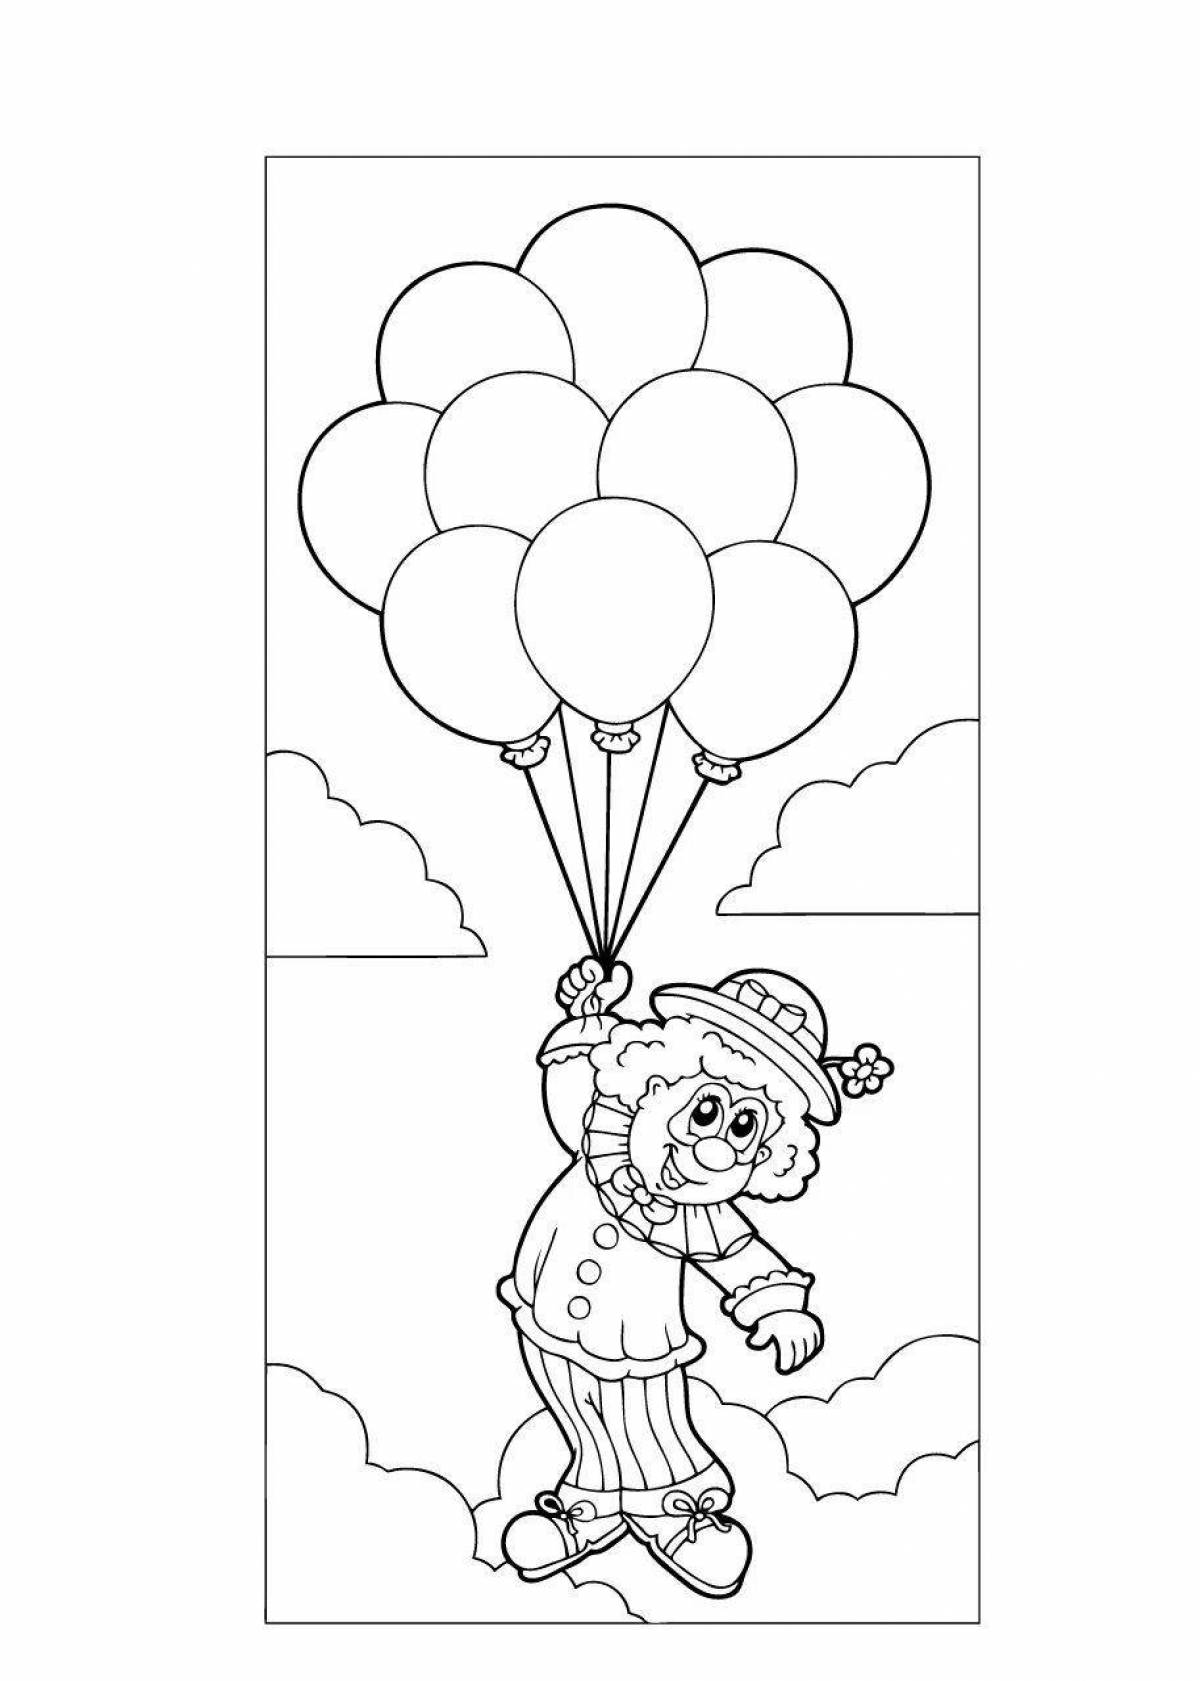 Colored bunch of balloons coloring book